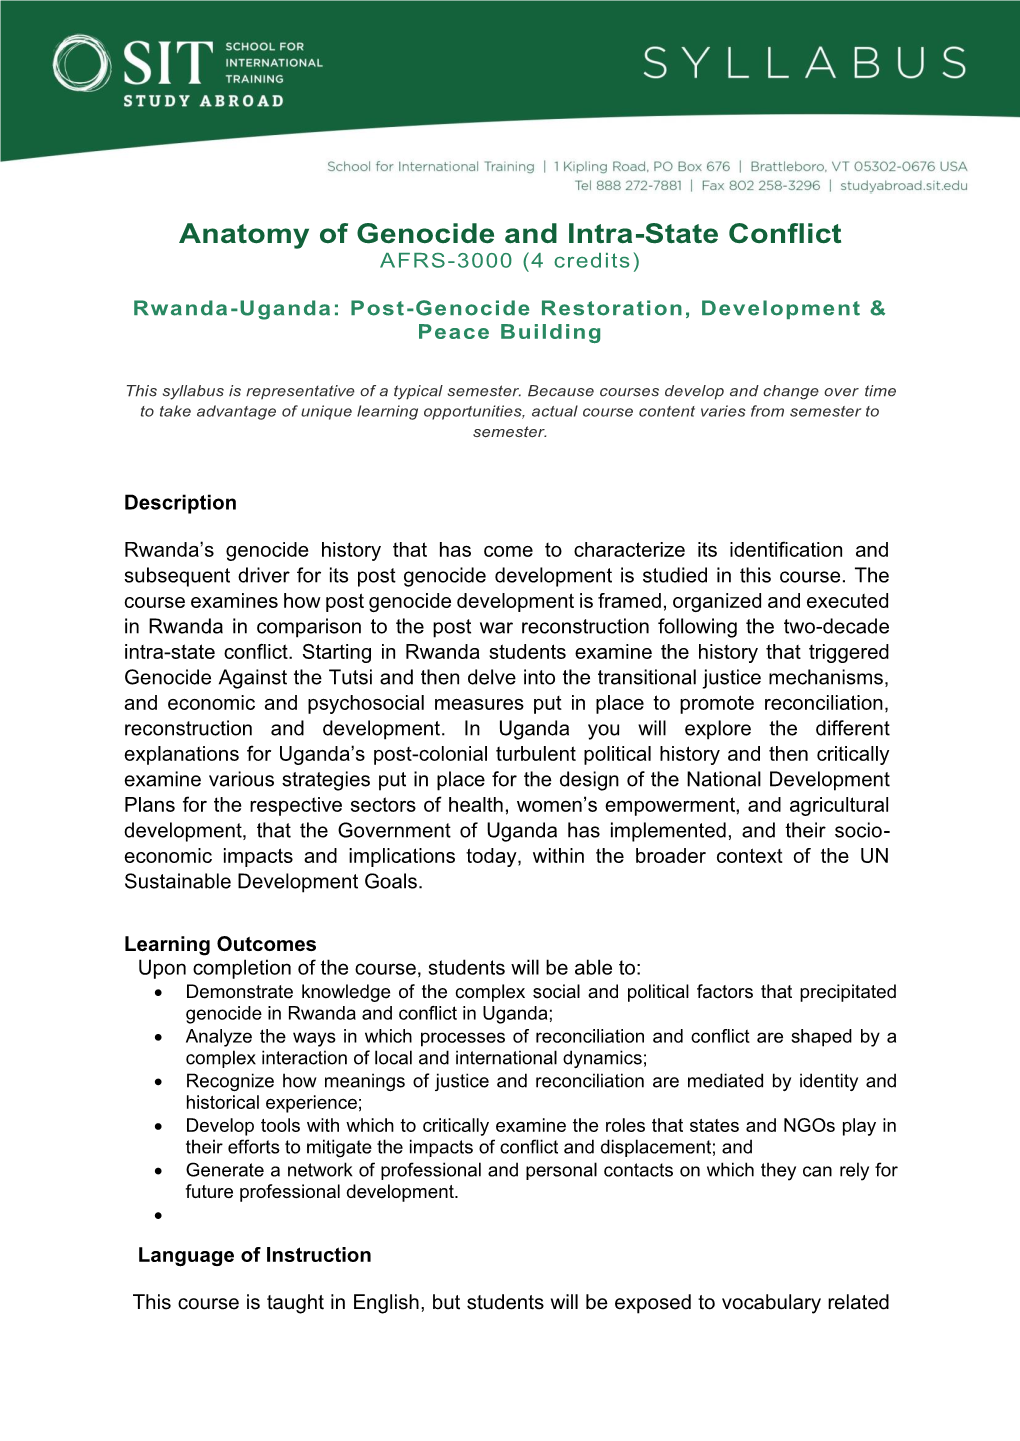 Anatomy of Genocide and Intra-State Conflict AFRS-3000 (4 Credits)